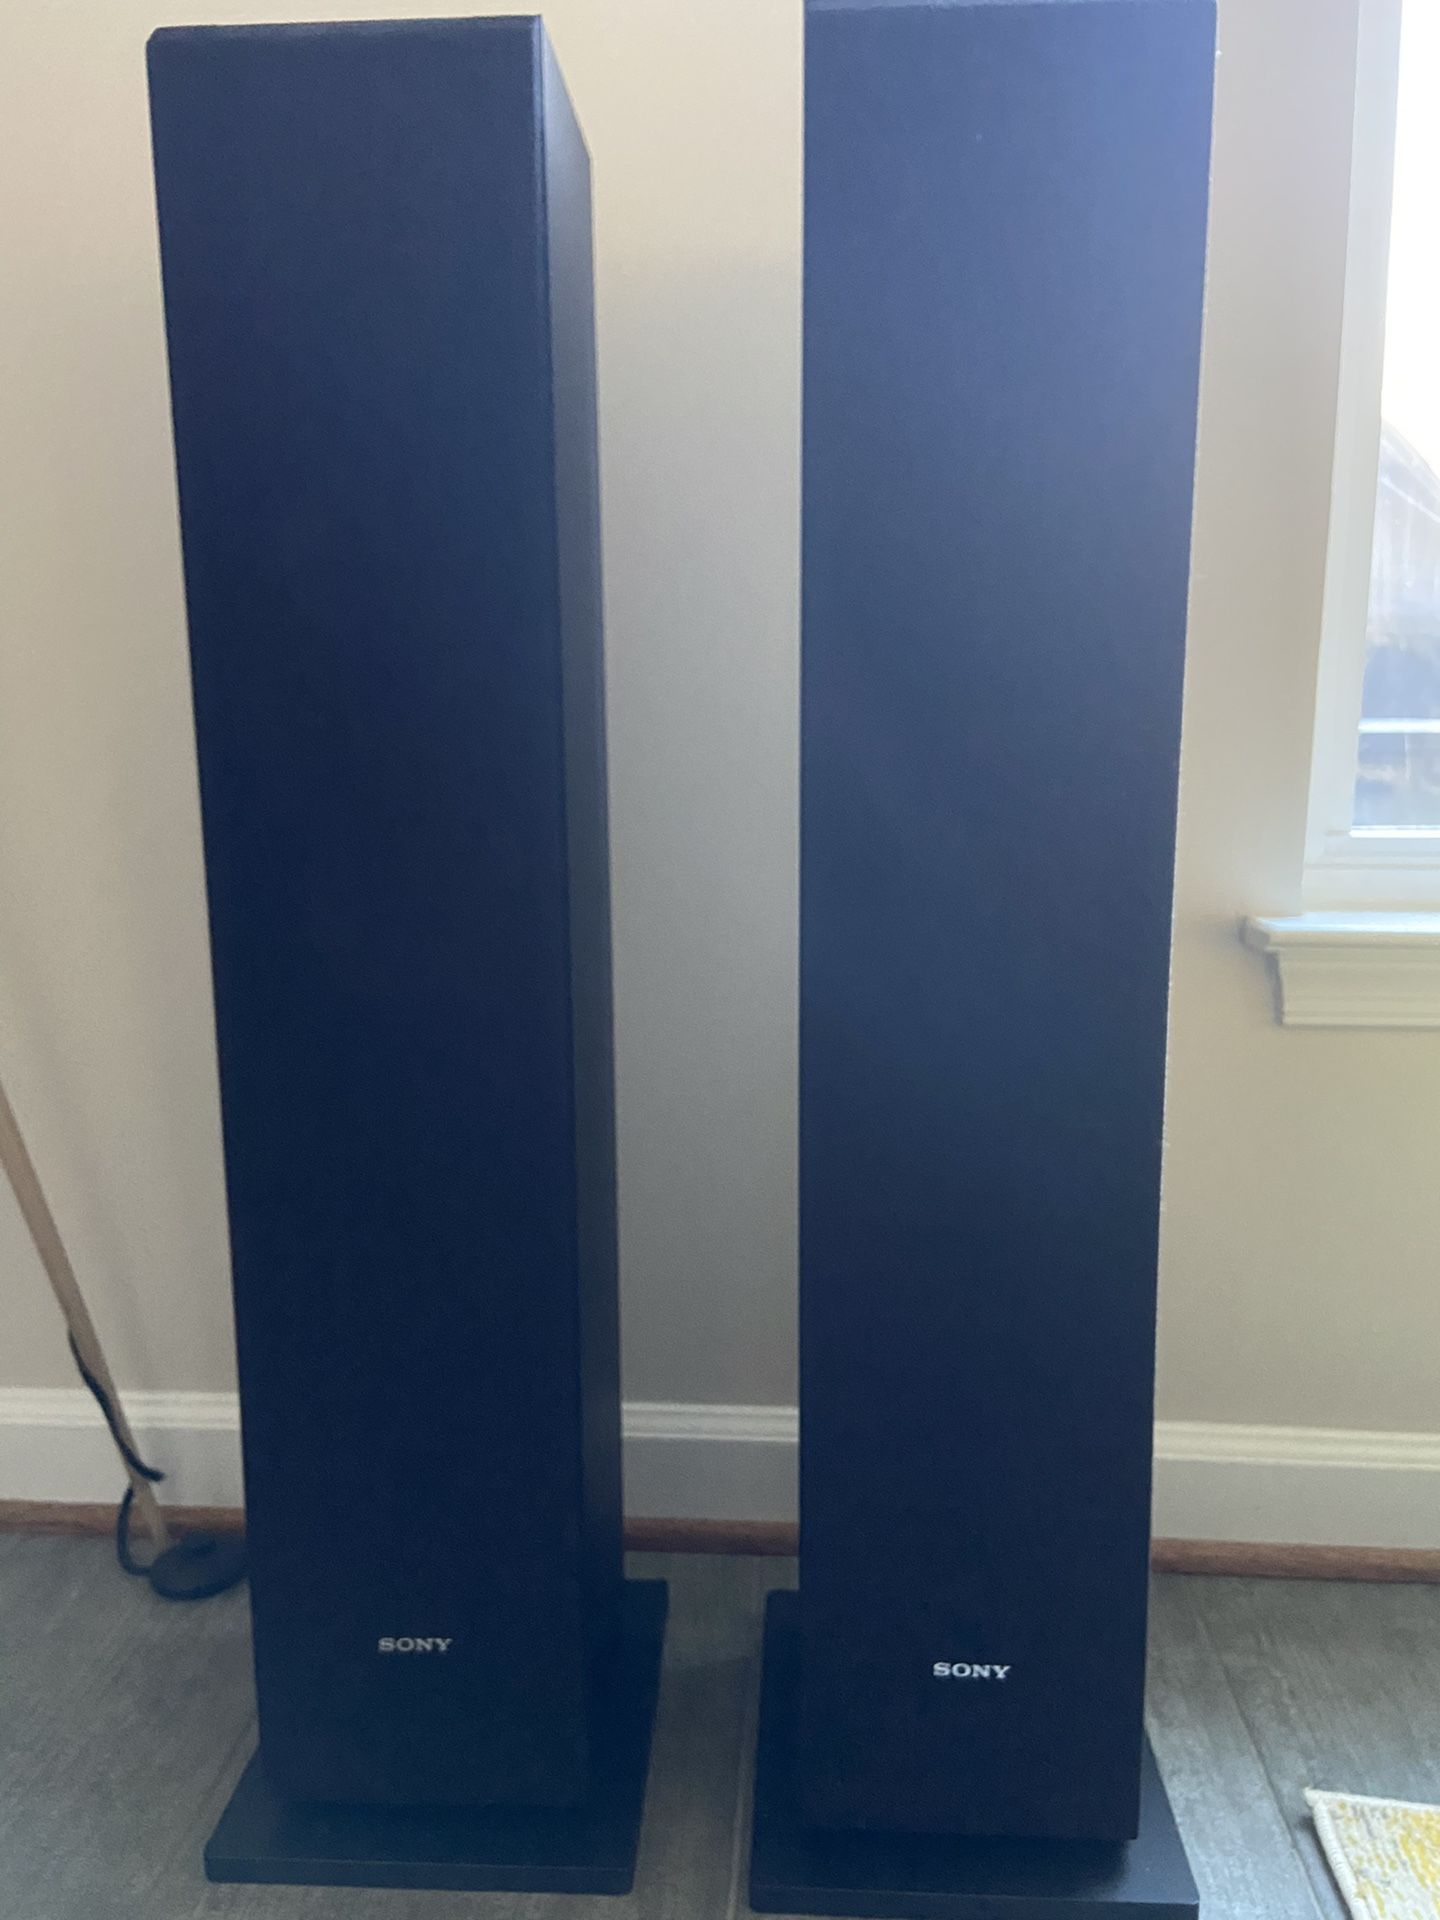 Sony tower speakers and Sony AVR (STR DN850)